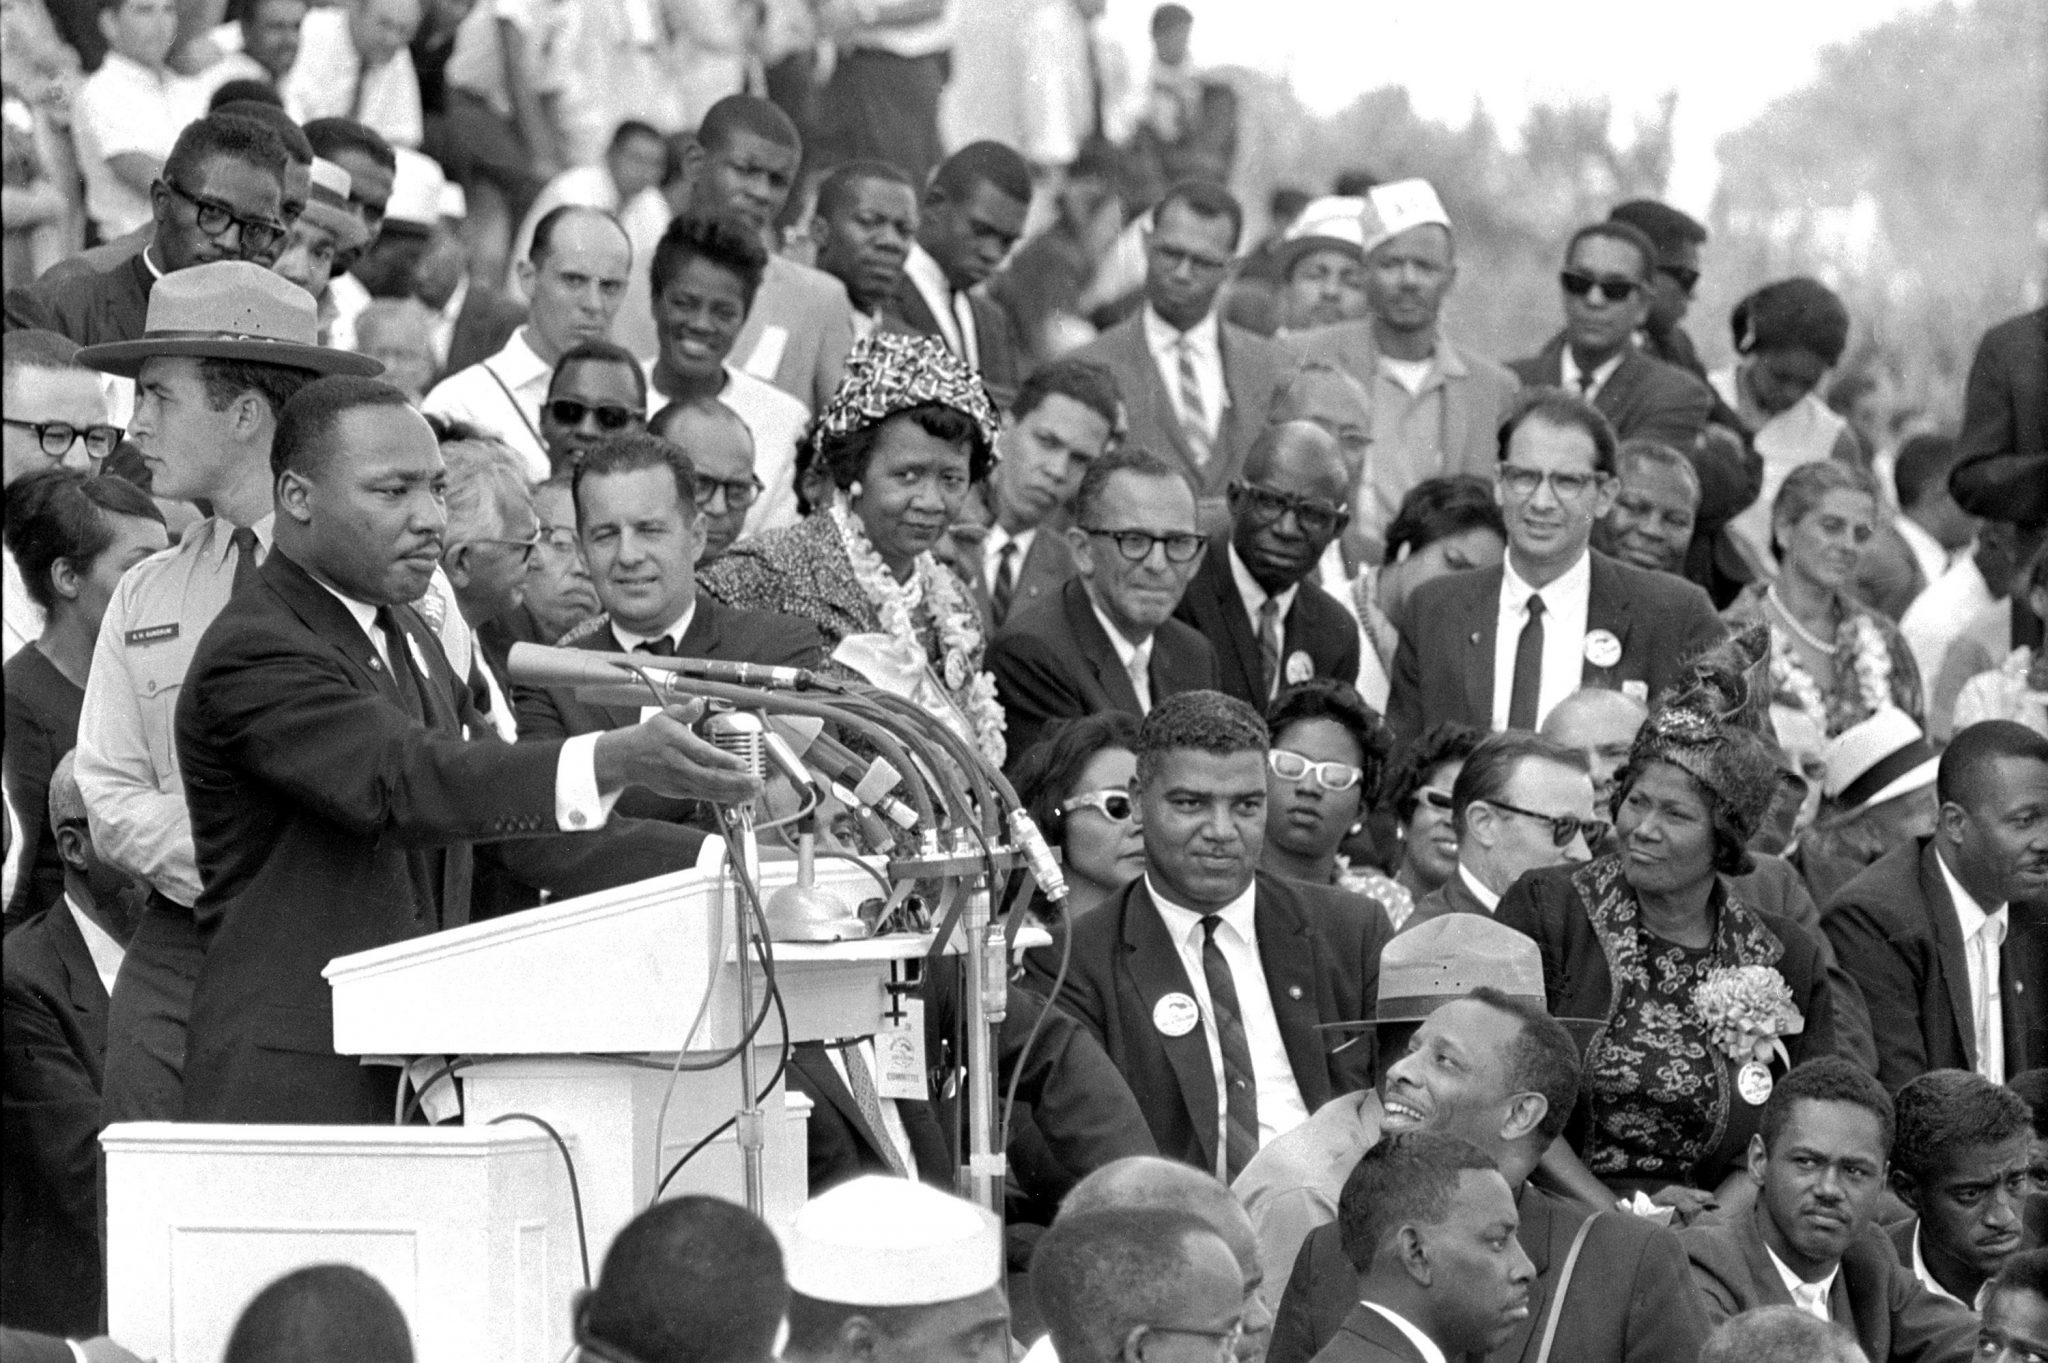 Black and white photo of MLK delivering his "I Have a Dream" speech in 1963